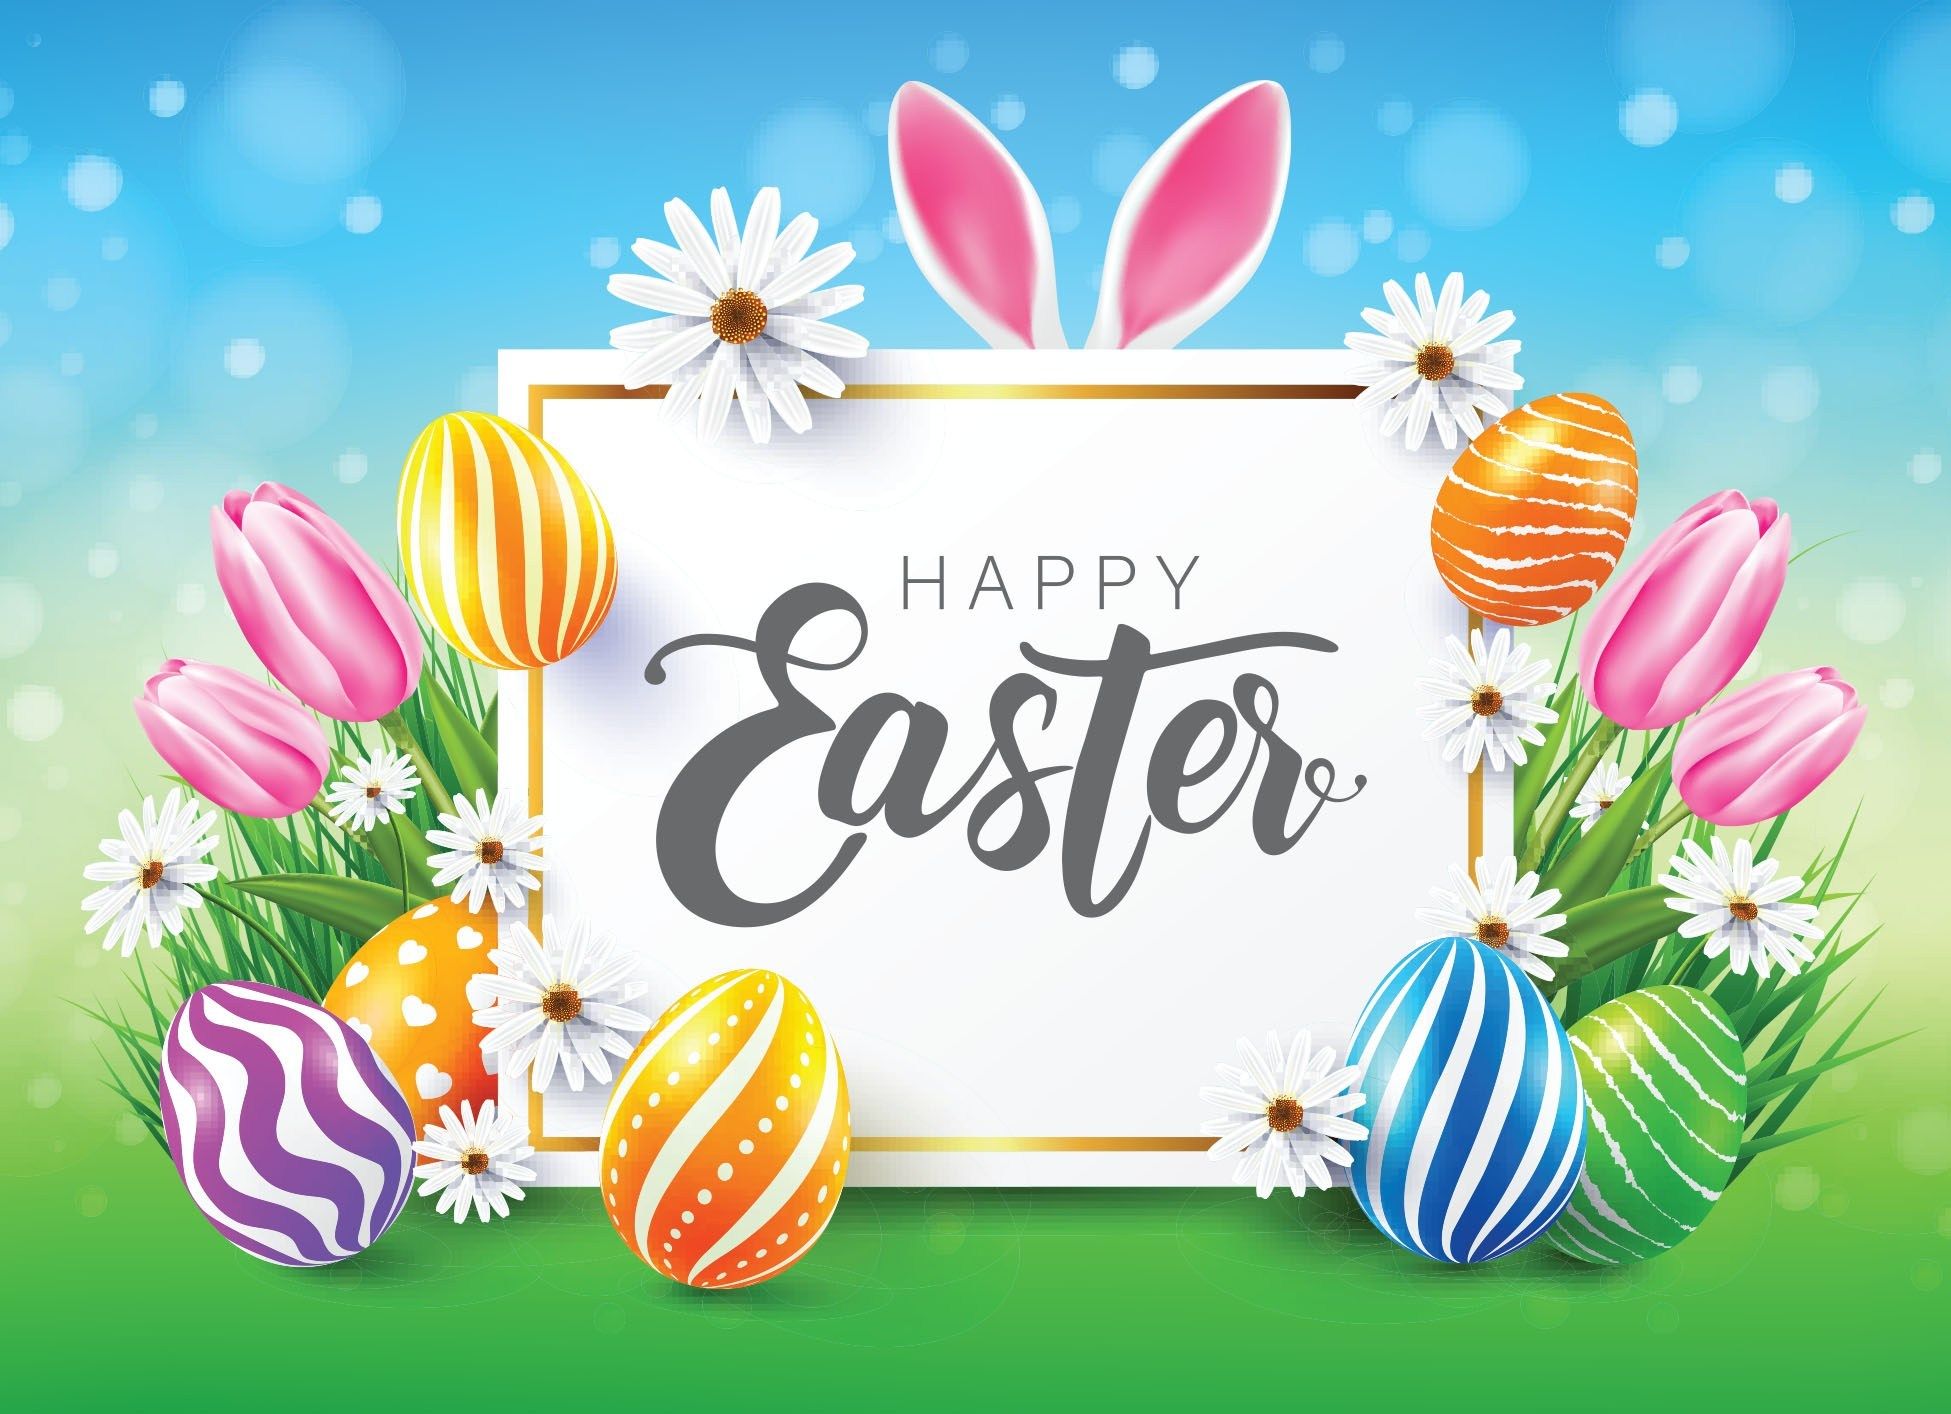 Happy Easter 2020 HD Wallpapers - Wallpaper Cave